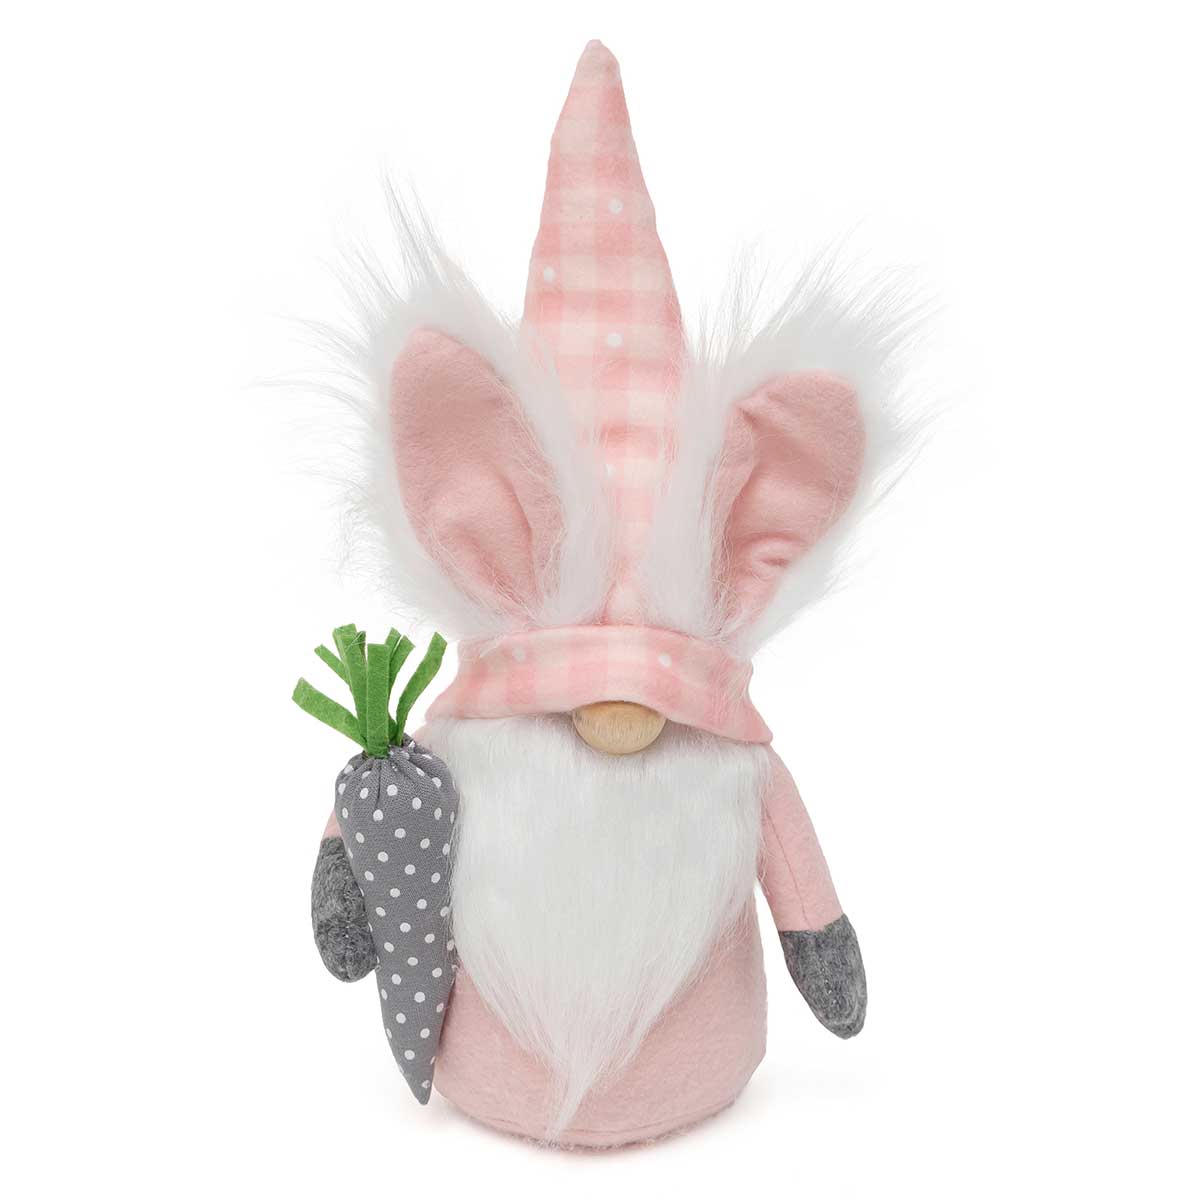 Wild Hare Gnome with Carrot, Wood Nose 12"